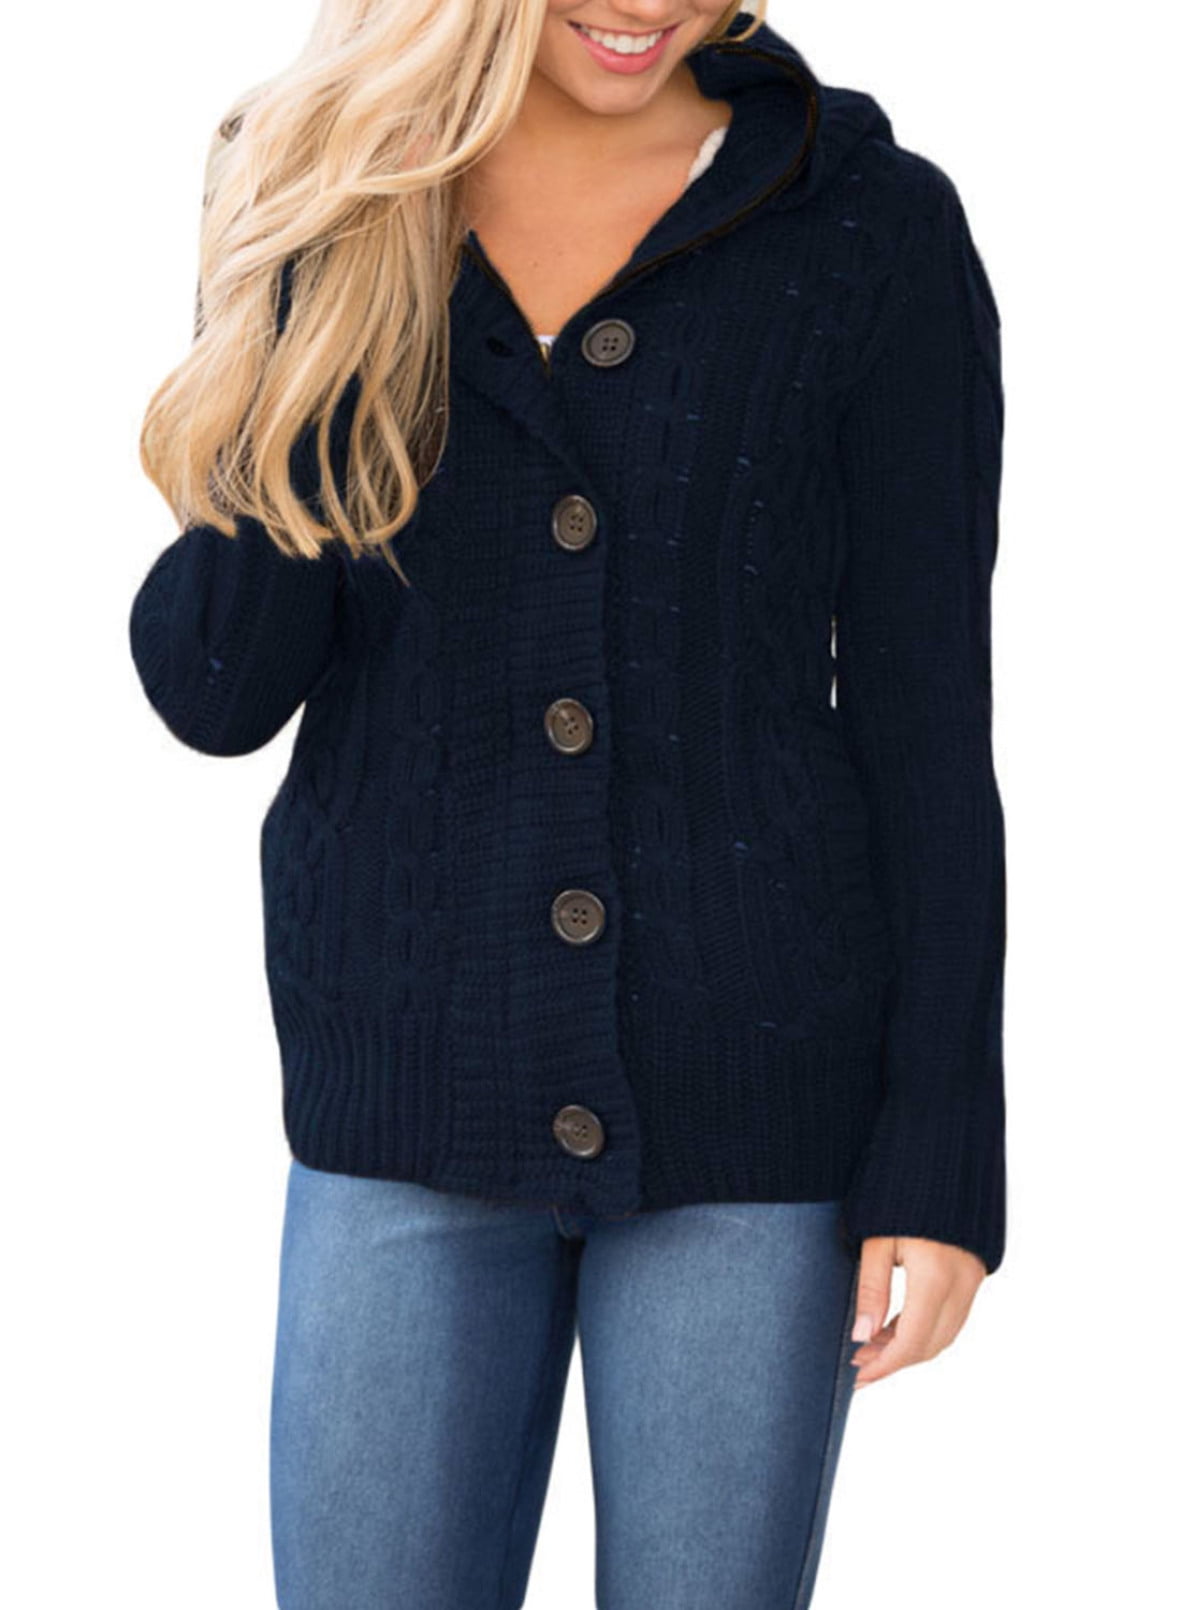 Aleumdr Womens Warm Button Up Knit Hooded Sweater with Pockets Cardigans Pullover Outwear